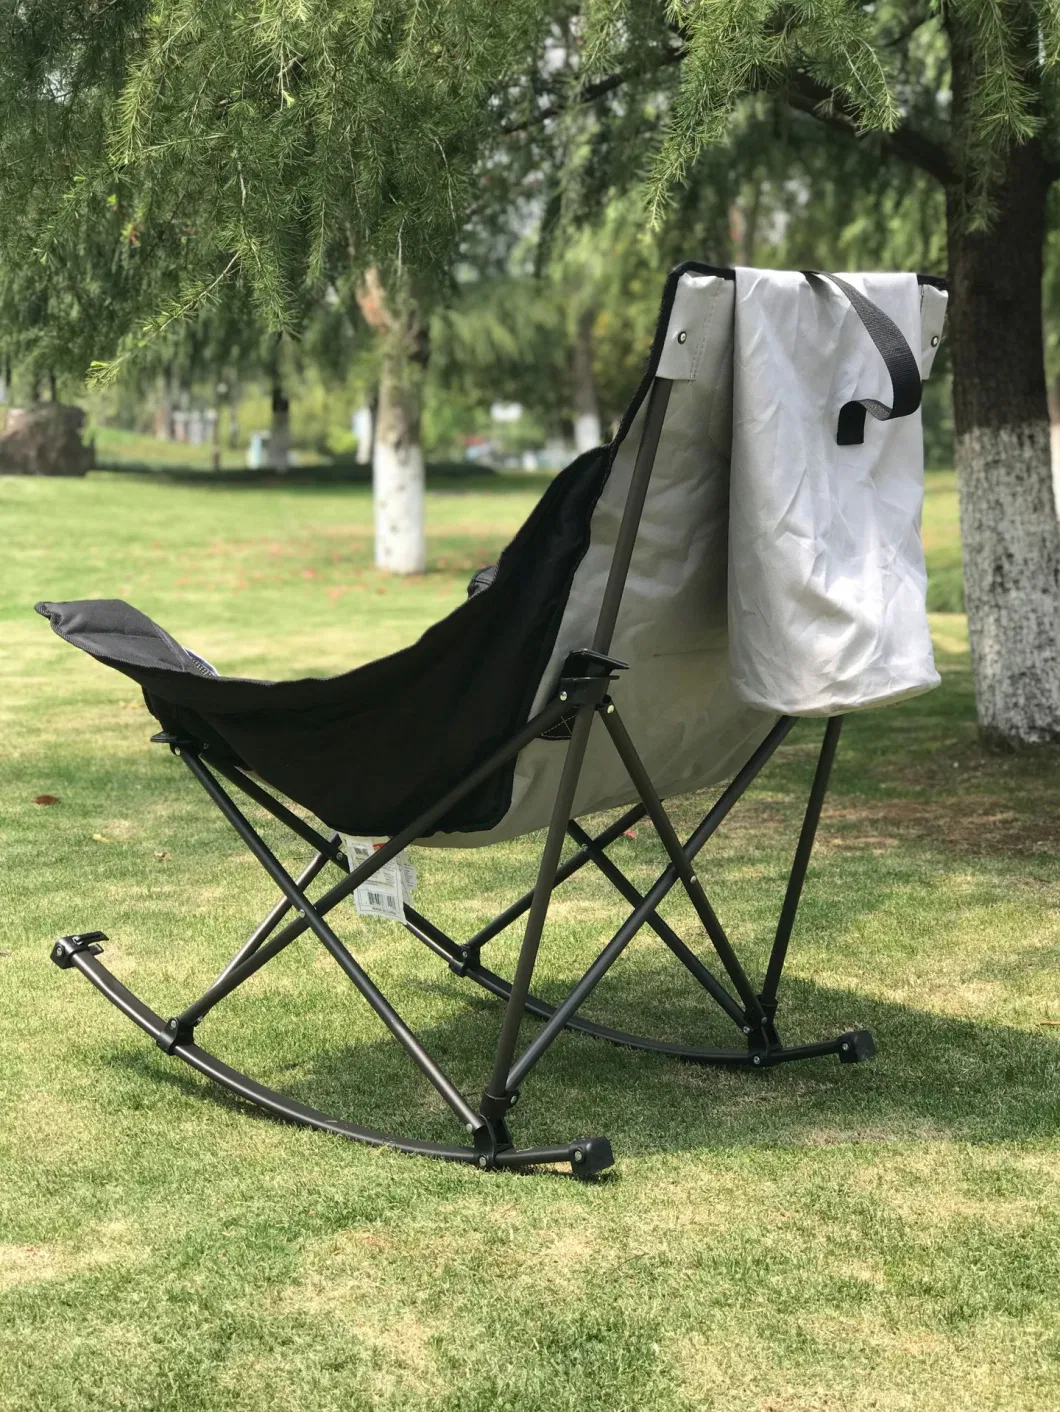 Folding Rocking Camping Chair Portable Outdoor Rocker Relax Outdoor Folding Chair